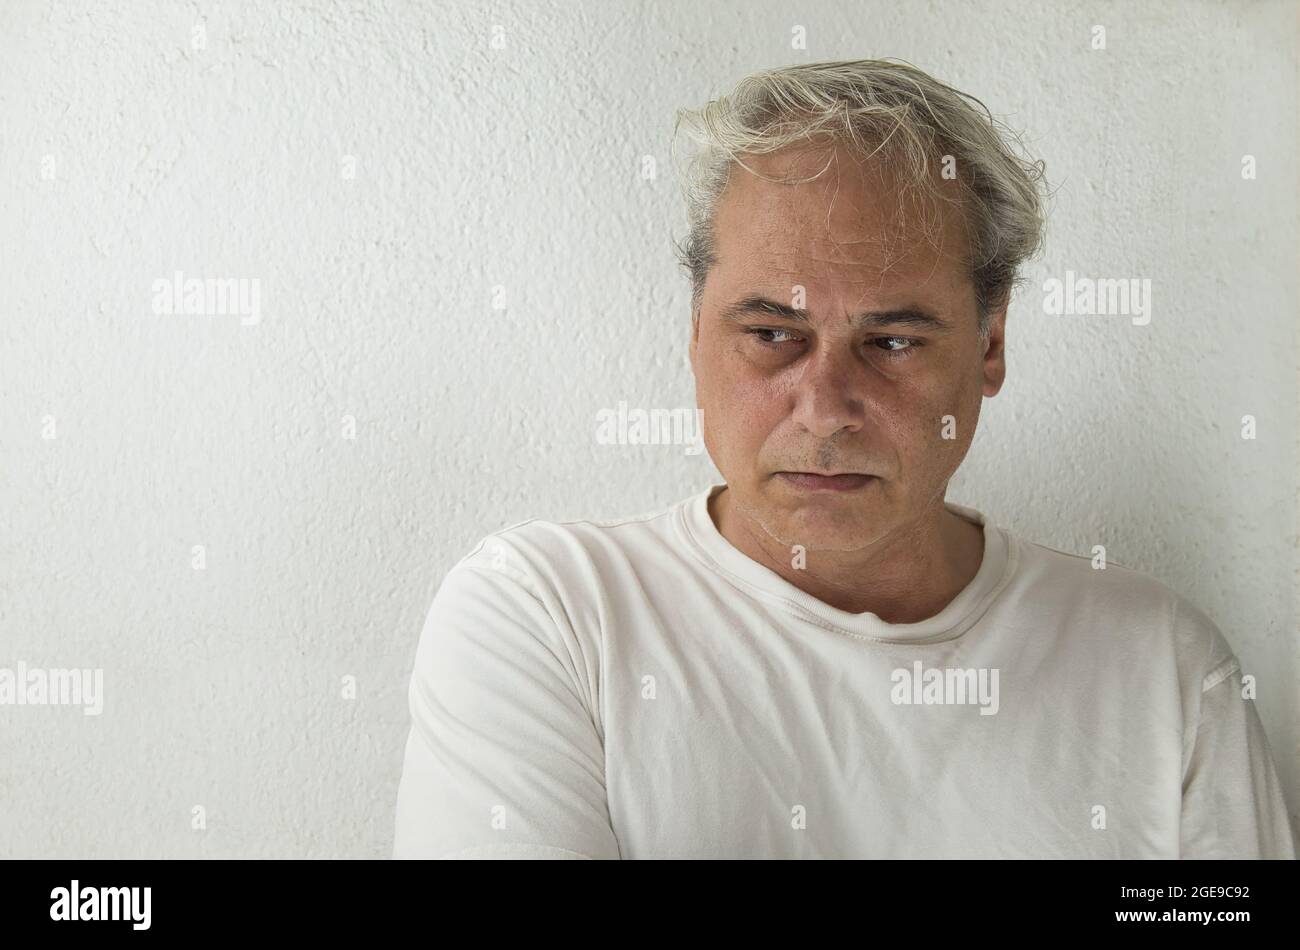 portrait of mature man with grey hair in white shirt on a white background Stock Photo